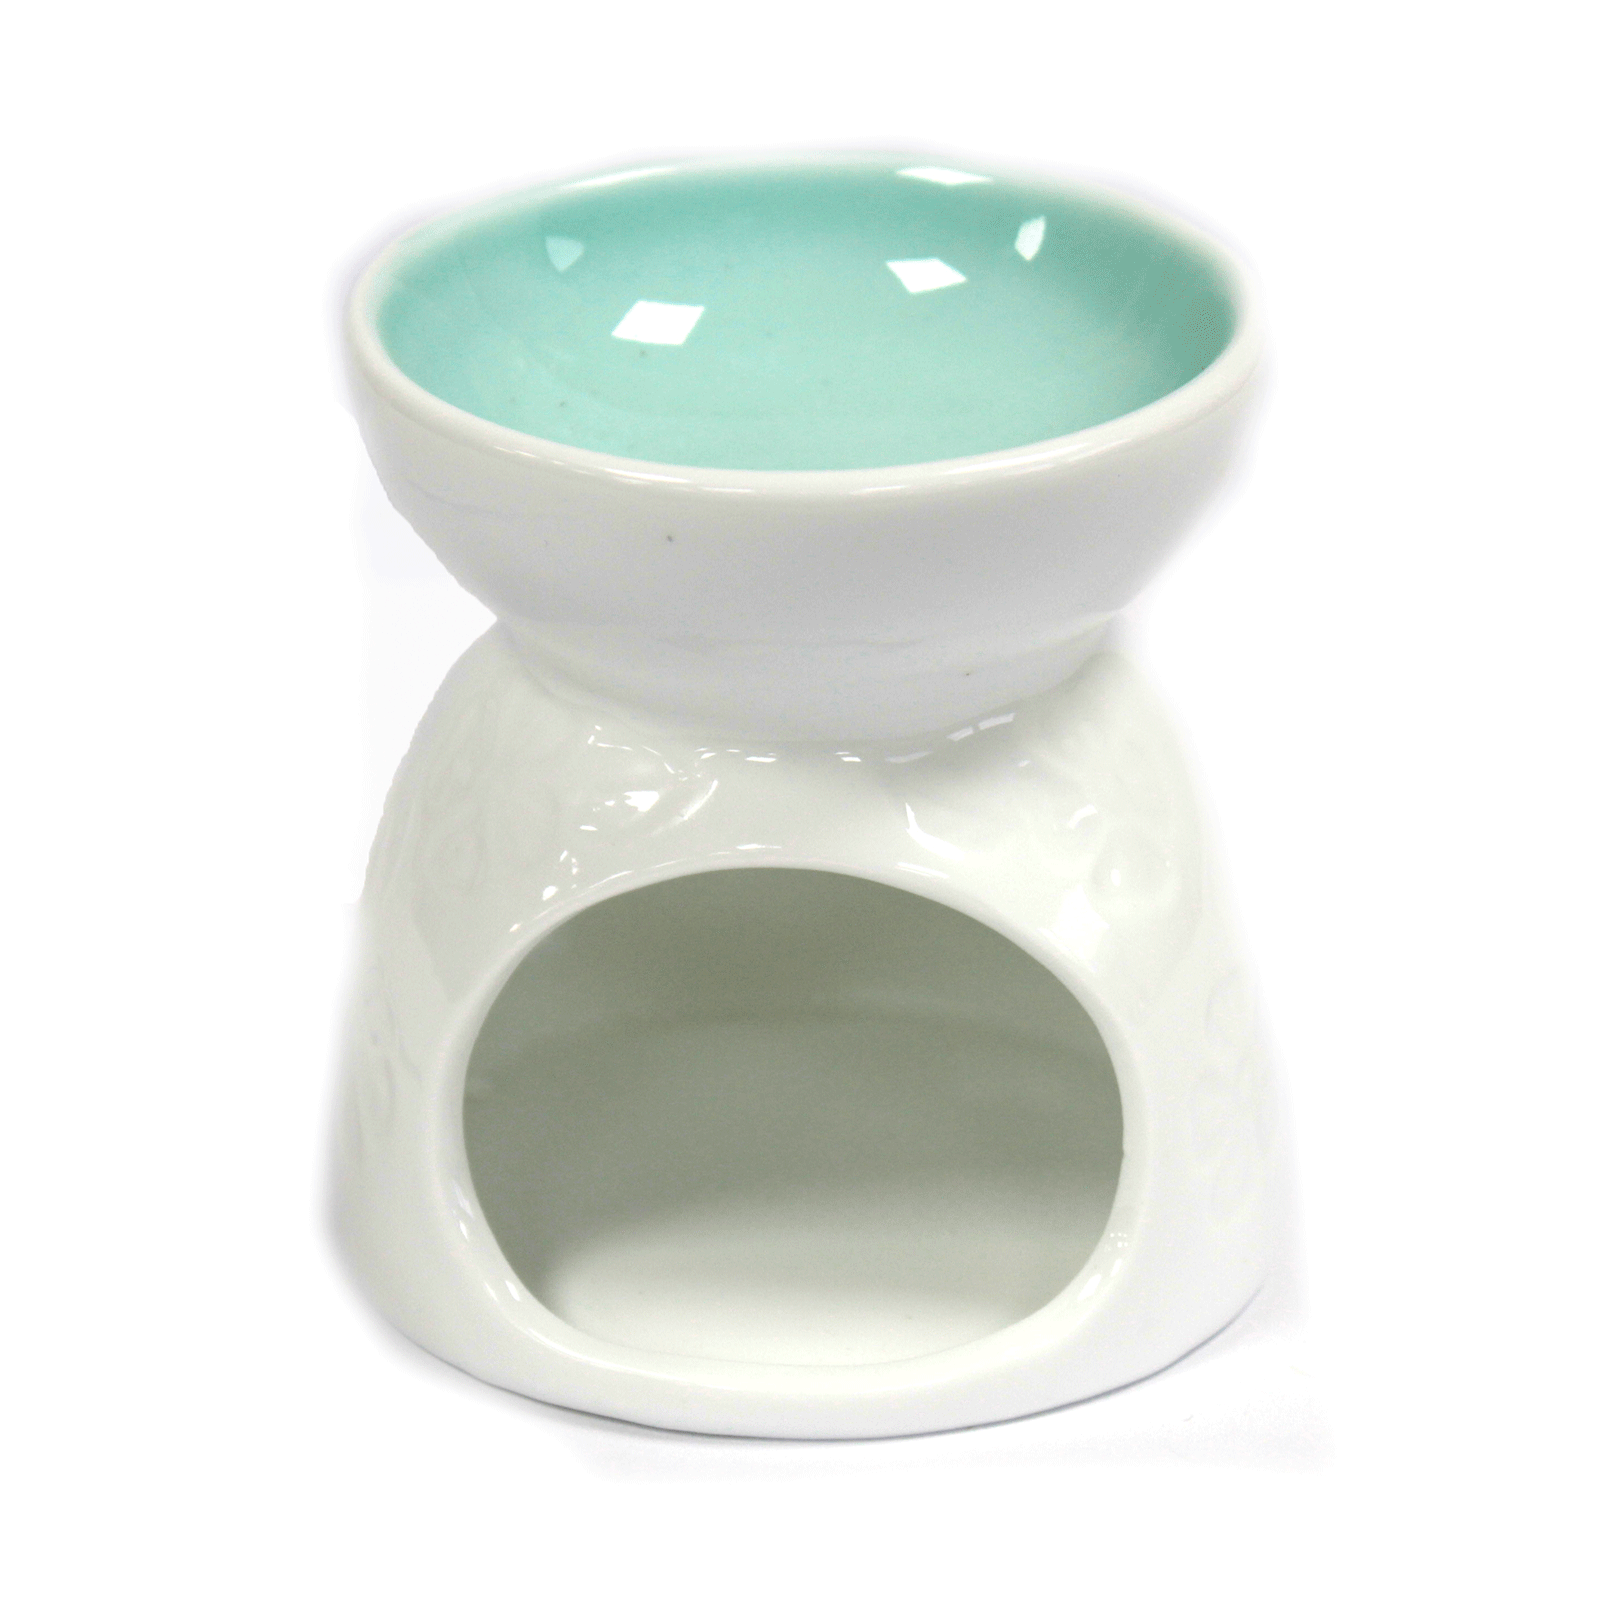 Classic White Oil Burner - Floral with Teal Well Oil Burner Soul Inspired 